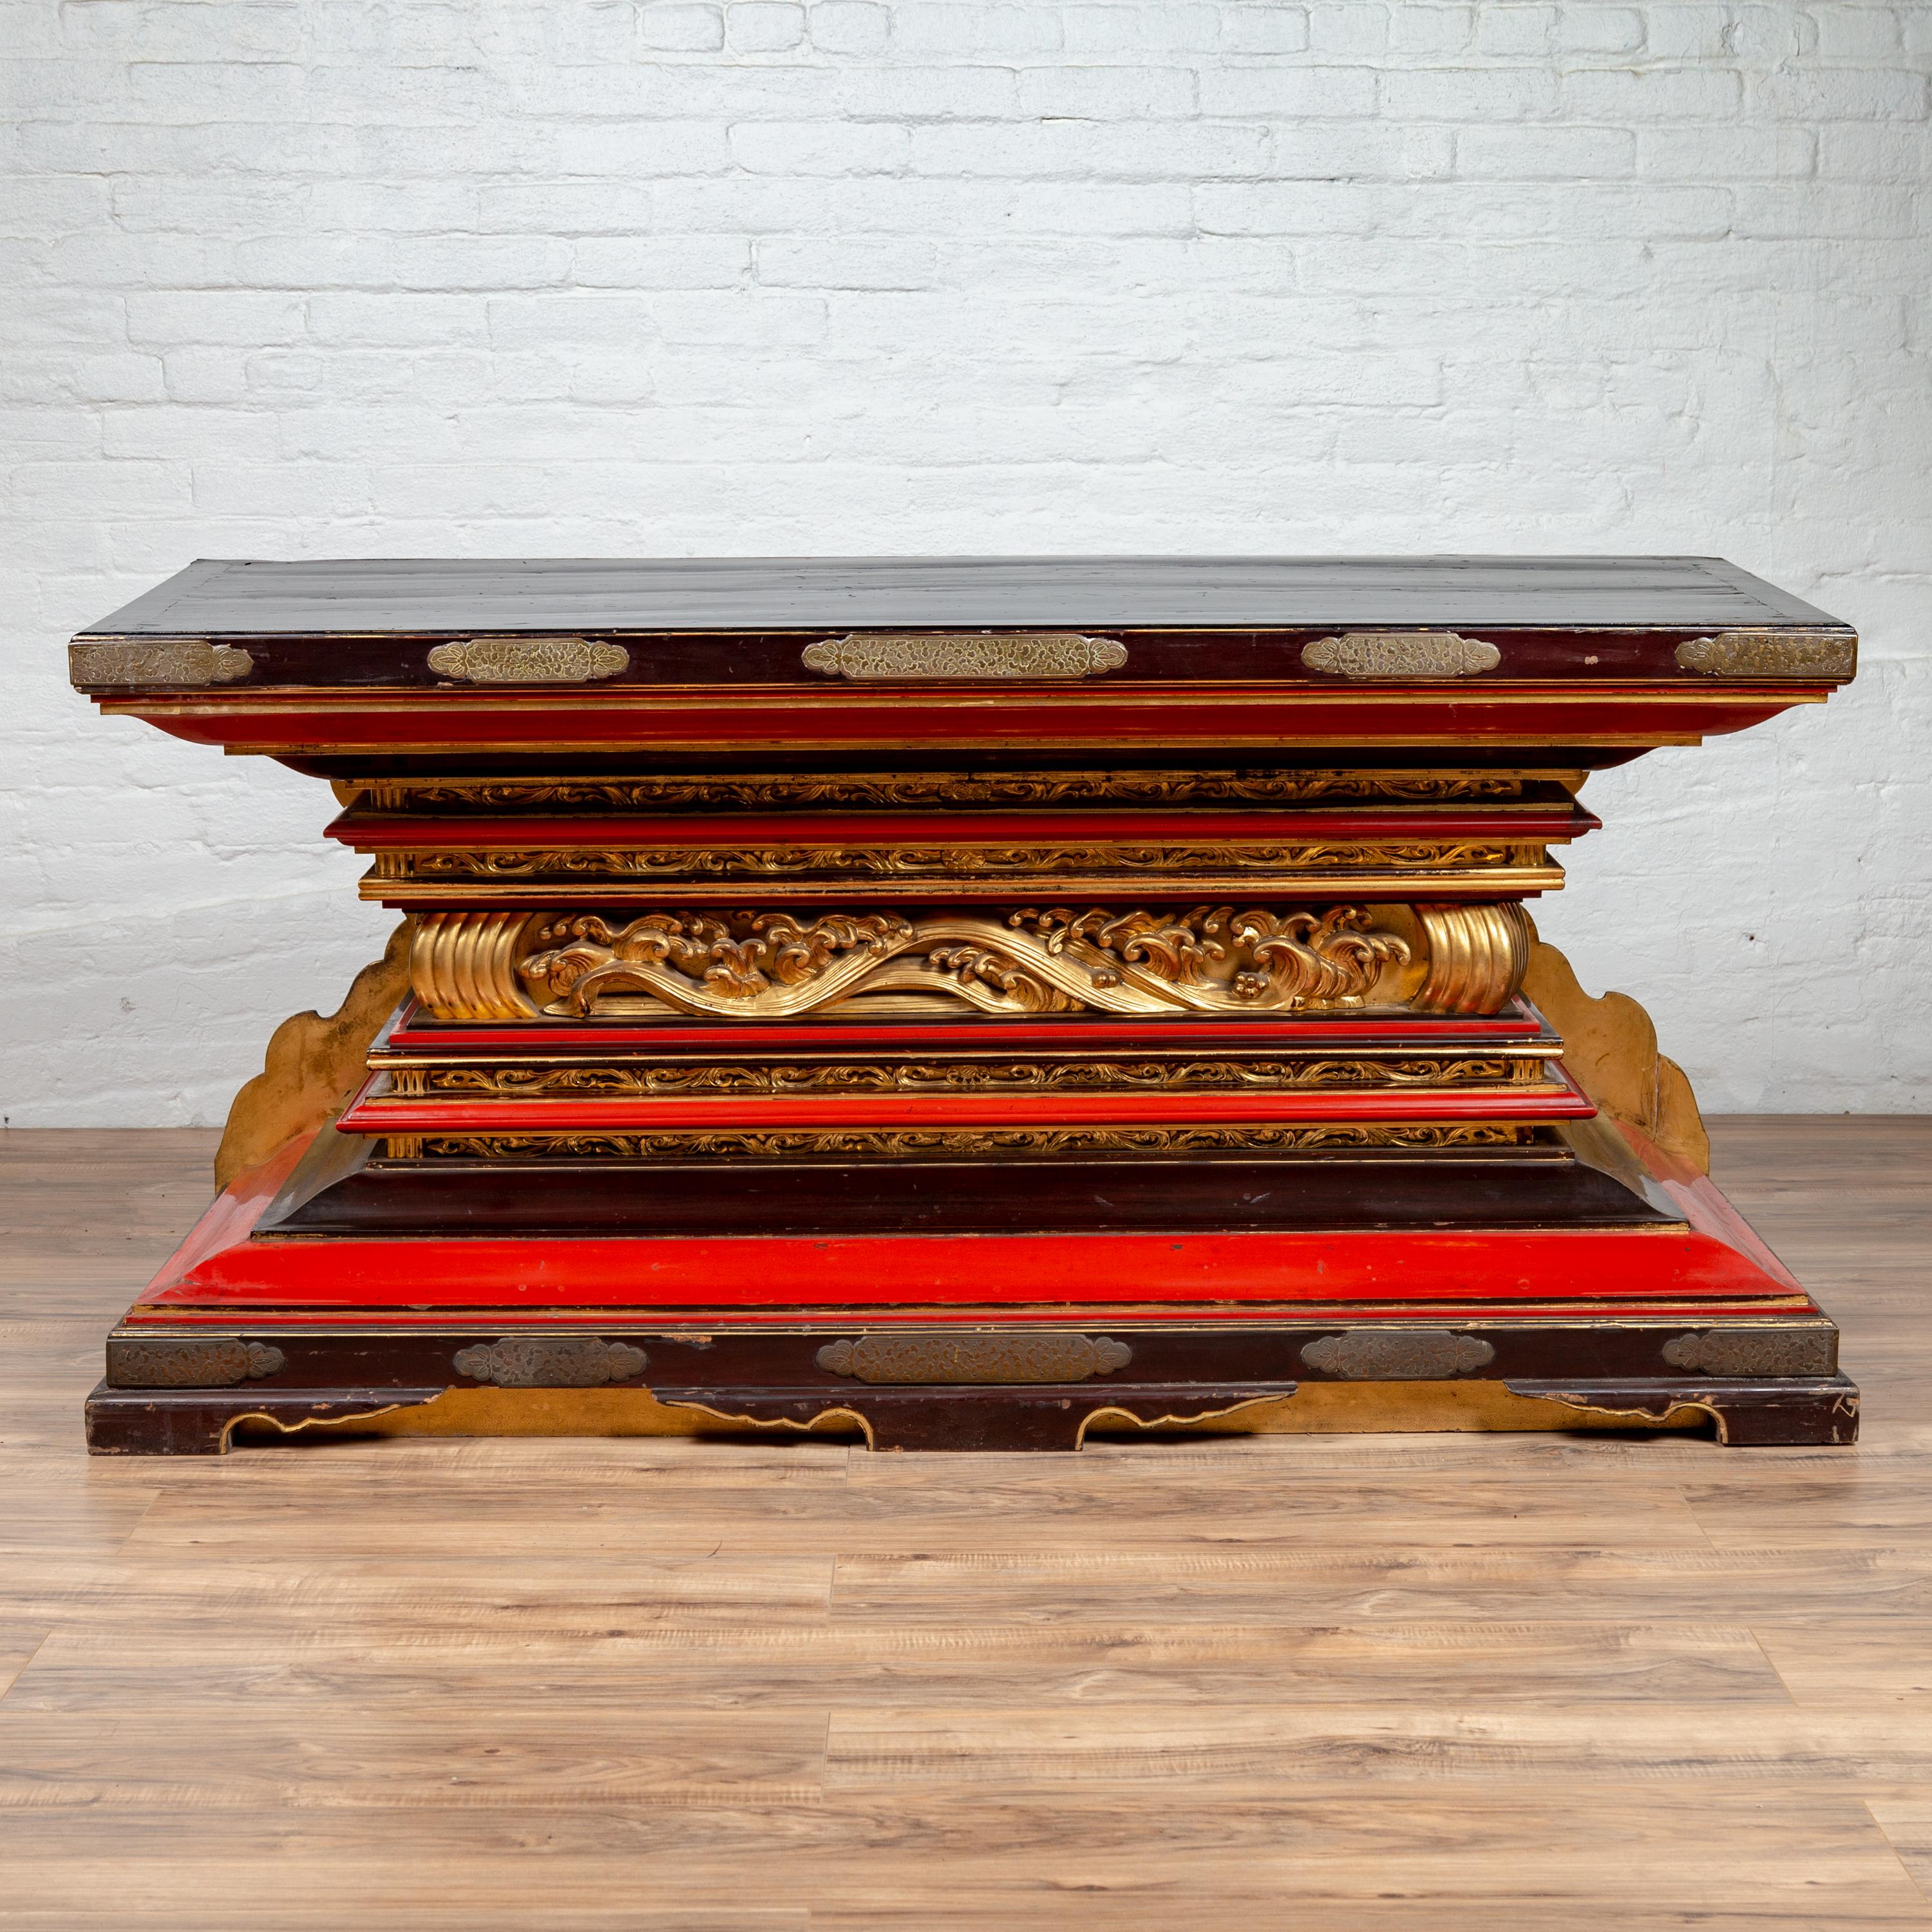 An antique Meiji period Japanese all lacquered altar shrine console table base from the late 19th century with black, red and gold highlights. Born in Japan in the late 1800s during the Meiji period, this altar shrine table base was used for